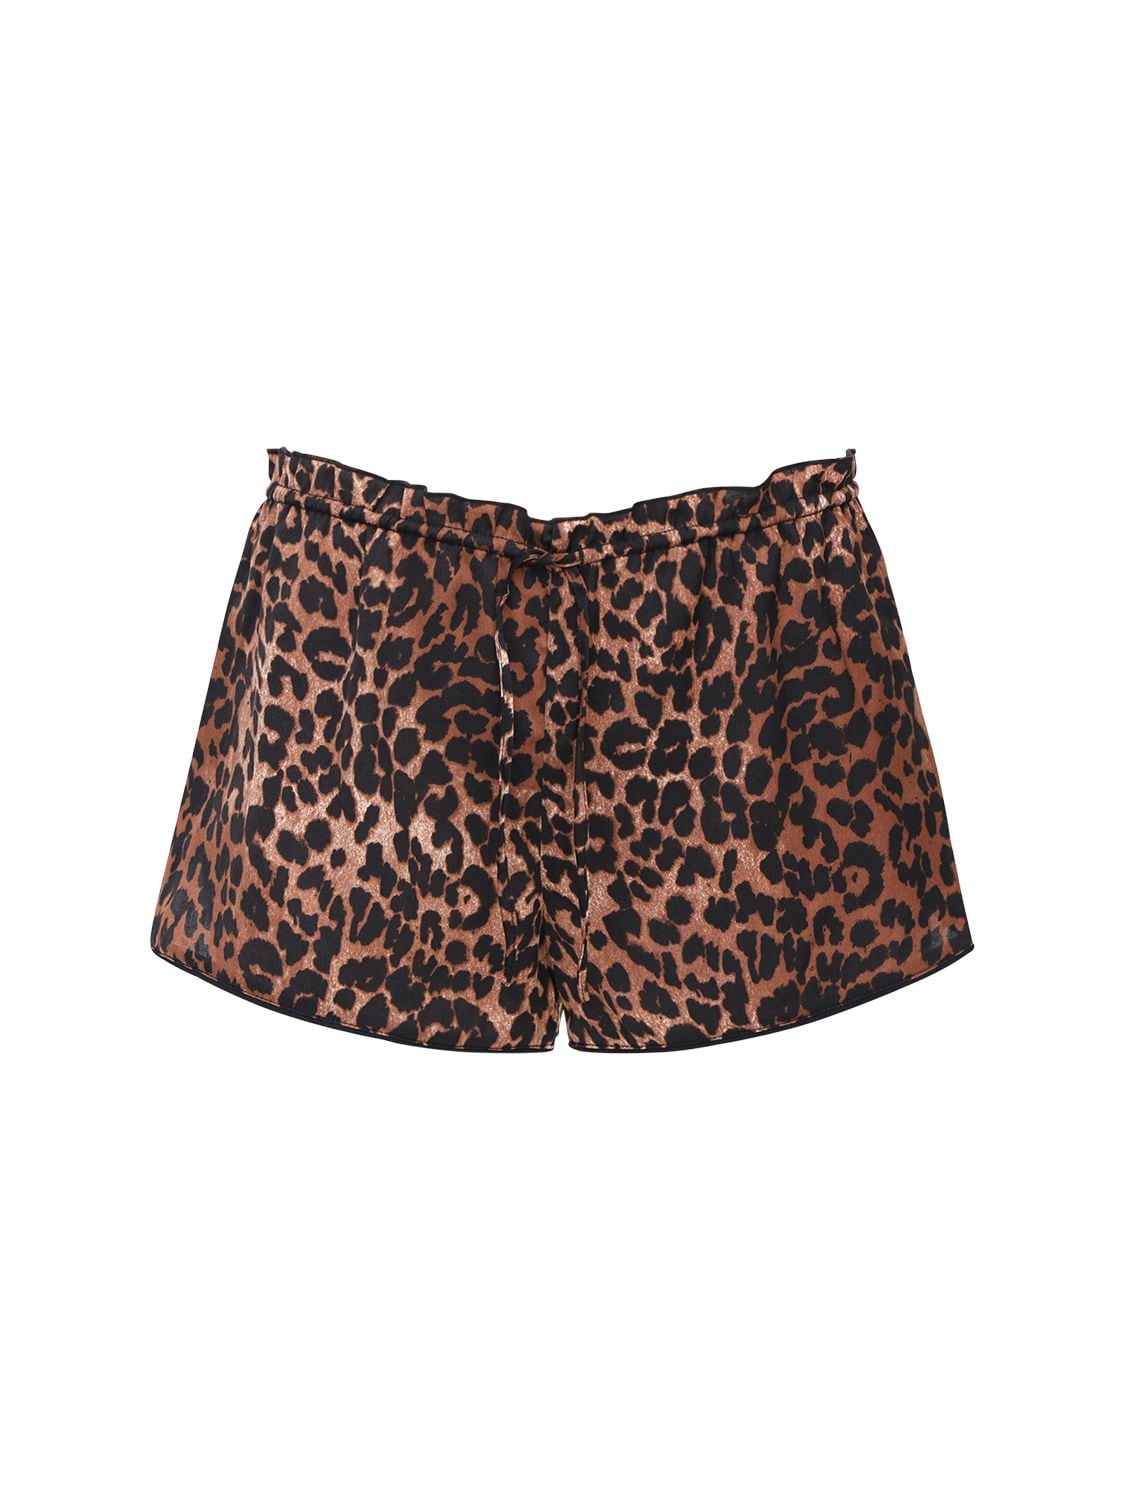 LOVE STORIES AUDREY PRINTED LEOPARD SHORTS